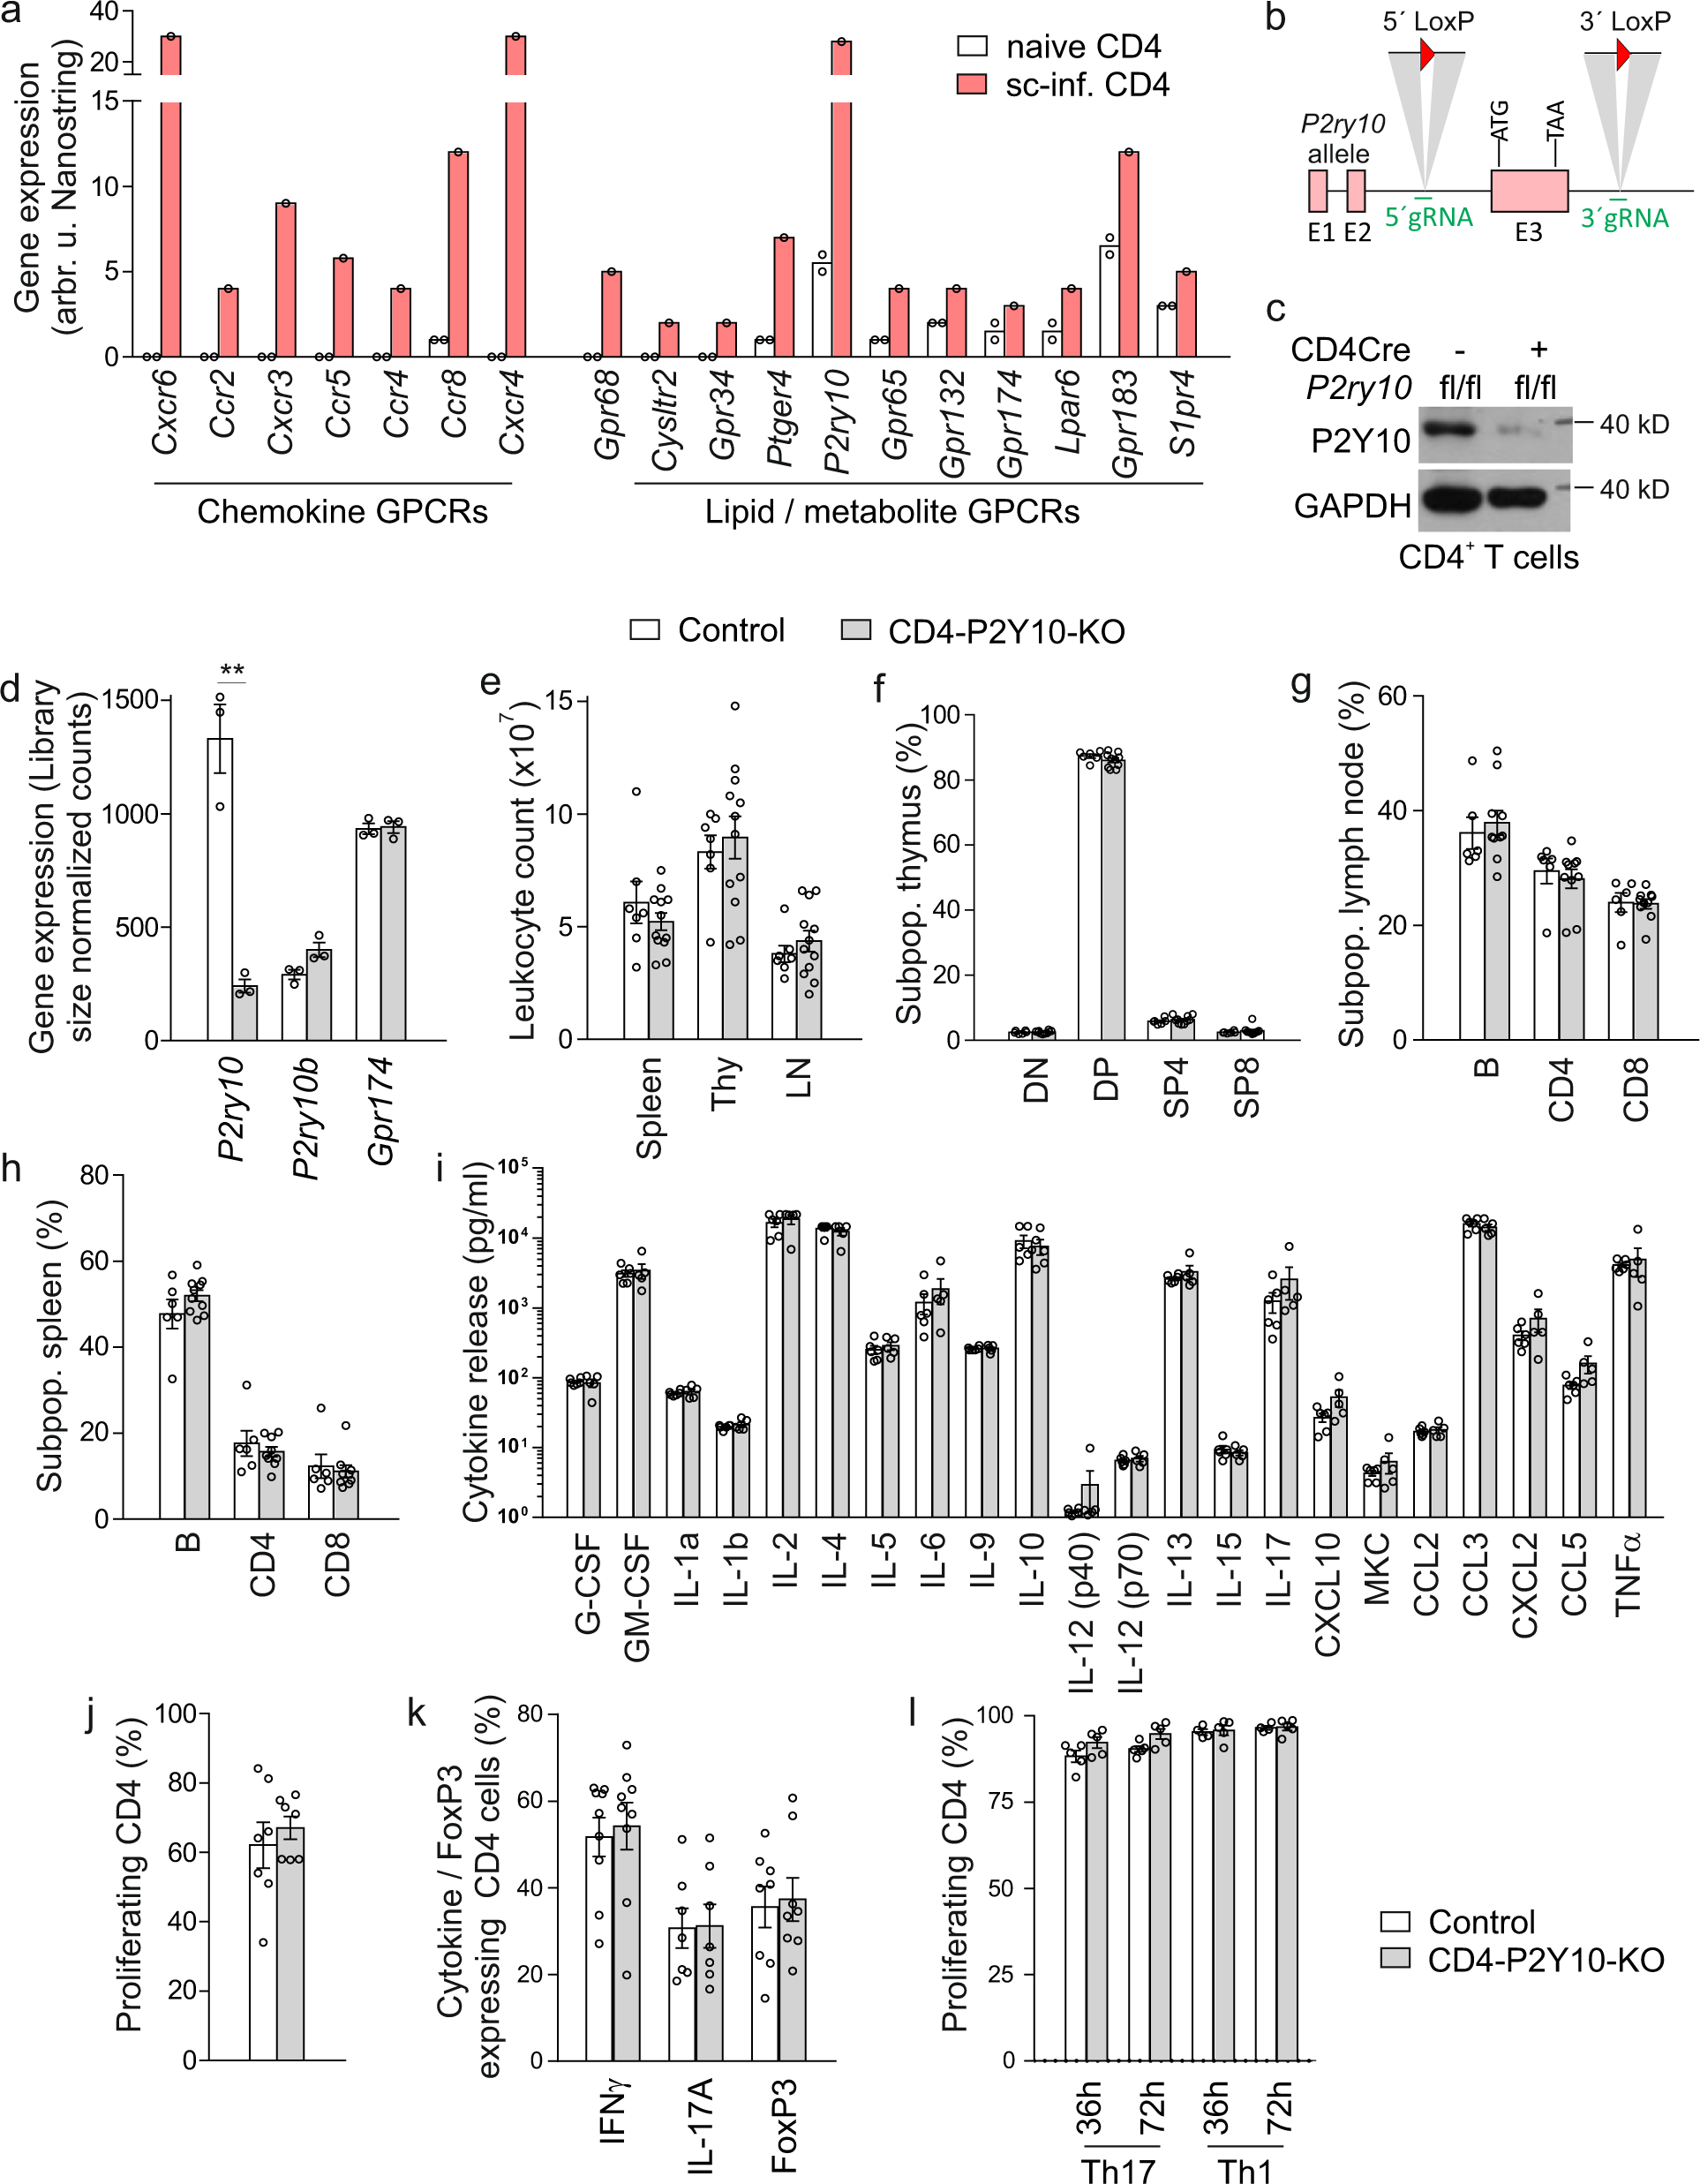 G-protein-coupled receptor P2Y10 facilitates chemokine-induced CD4 T cell  migration through autocrine/paracrine mediators | Nature Communications